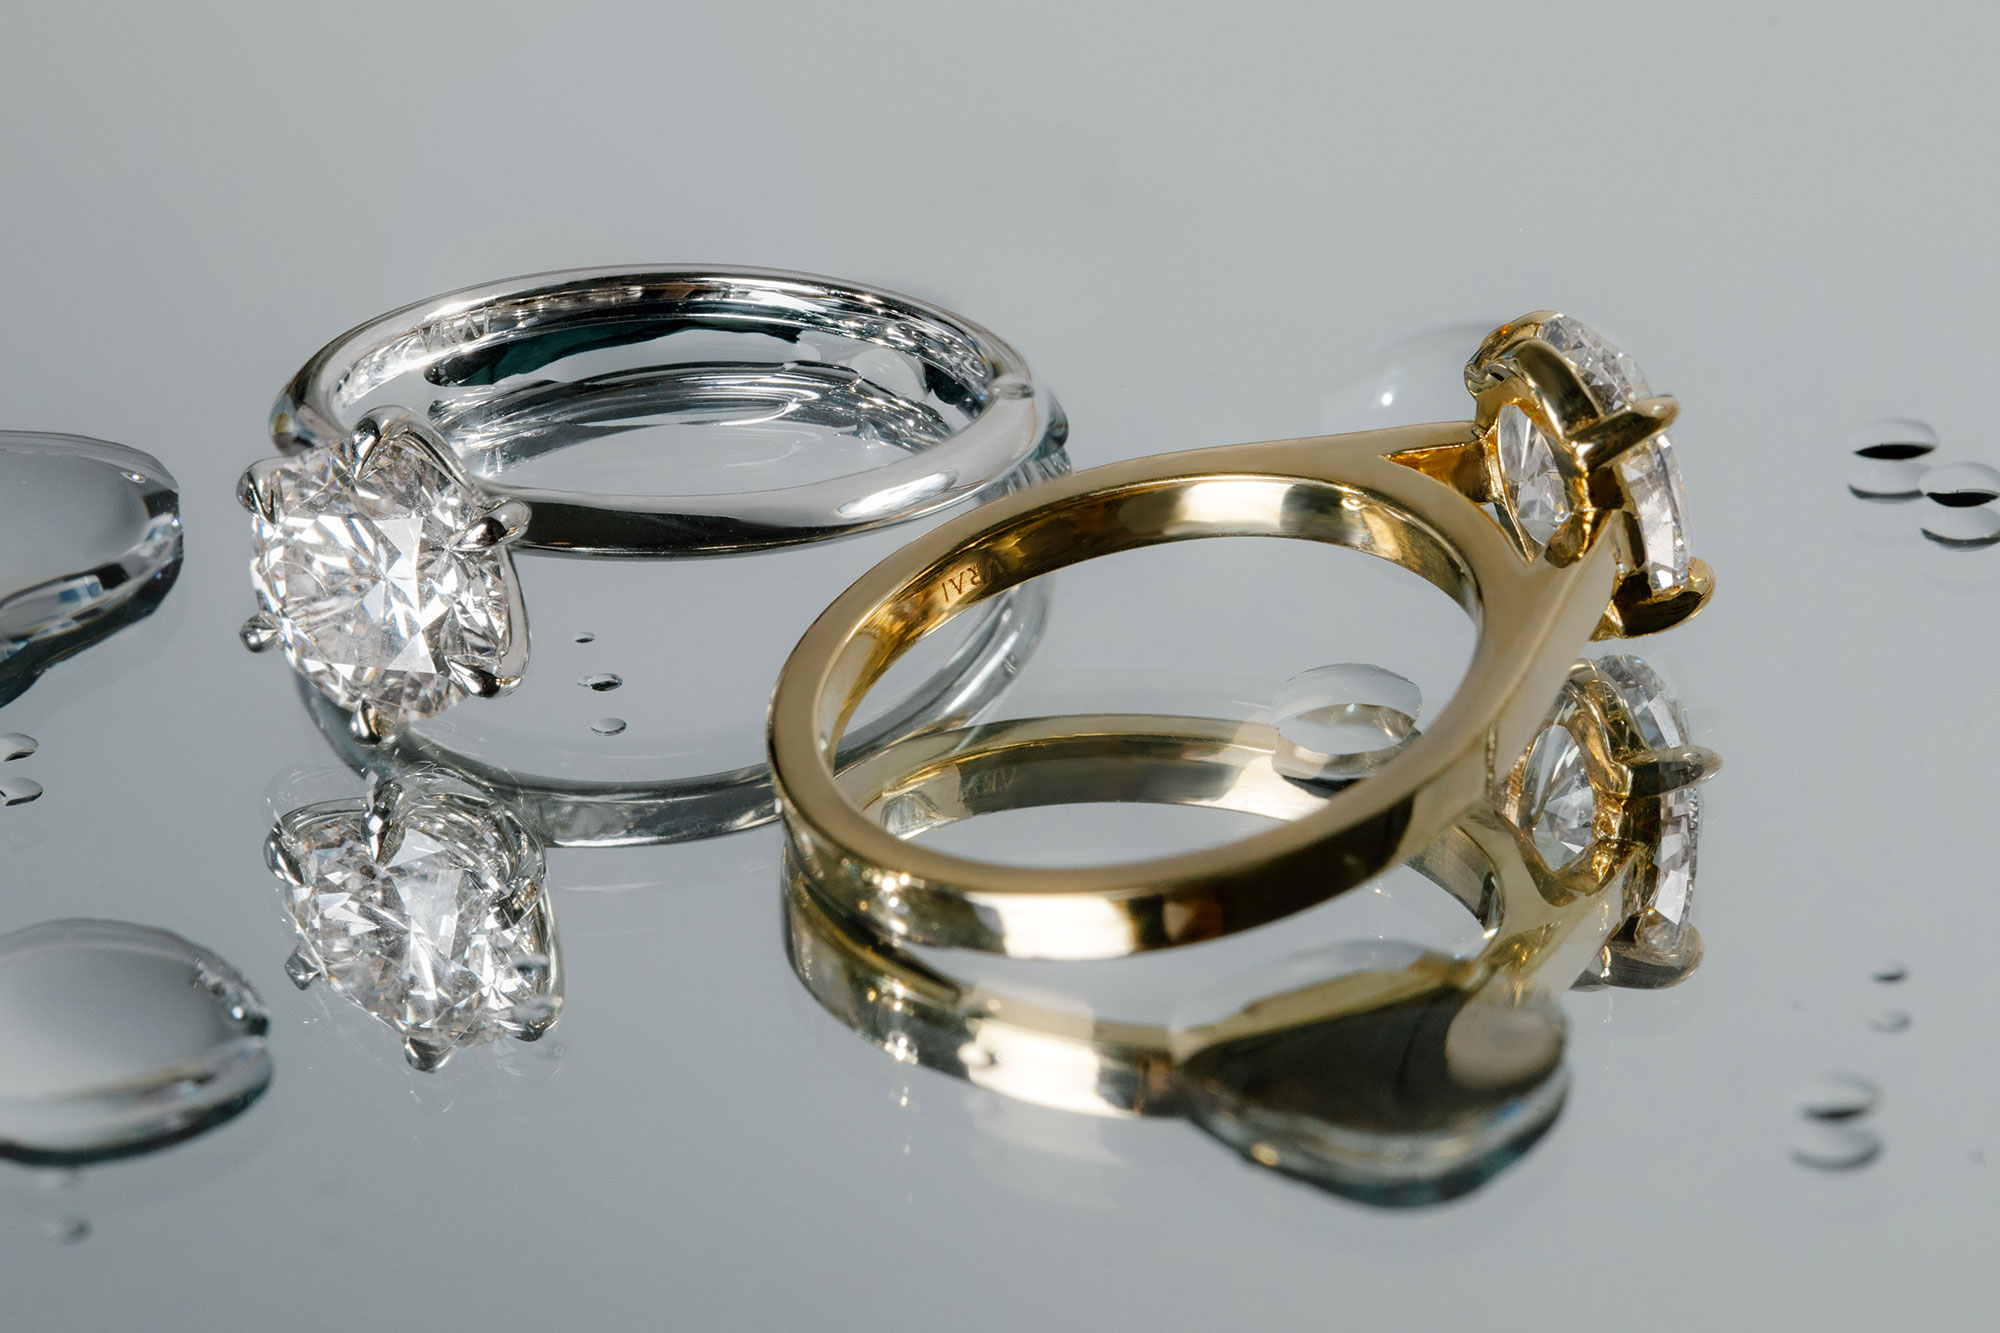 How to Safely Clean Your Diamond Jewelry at Home